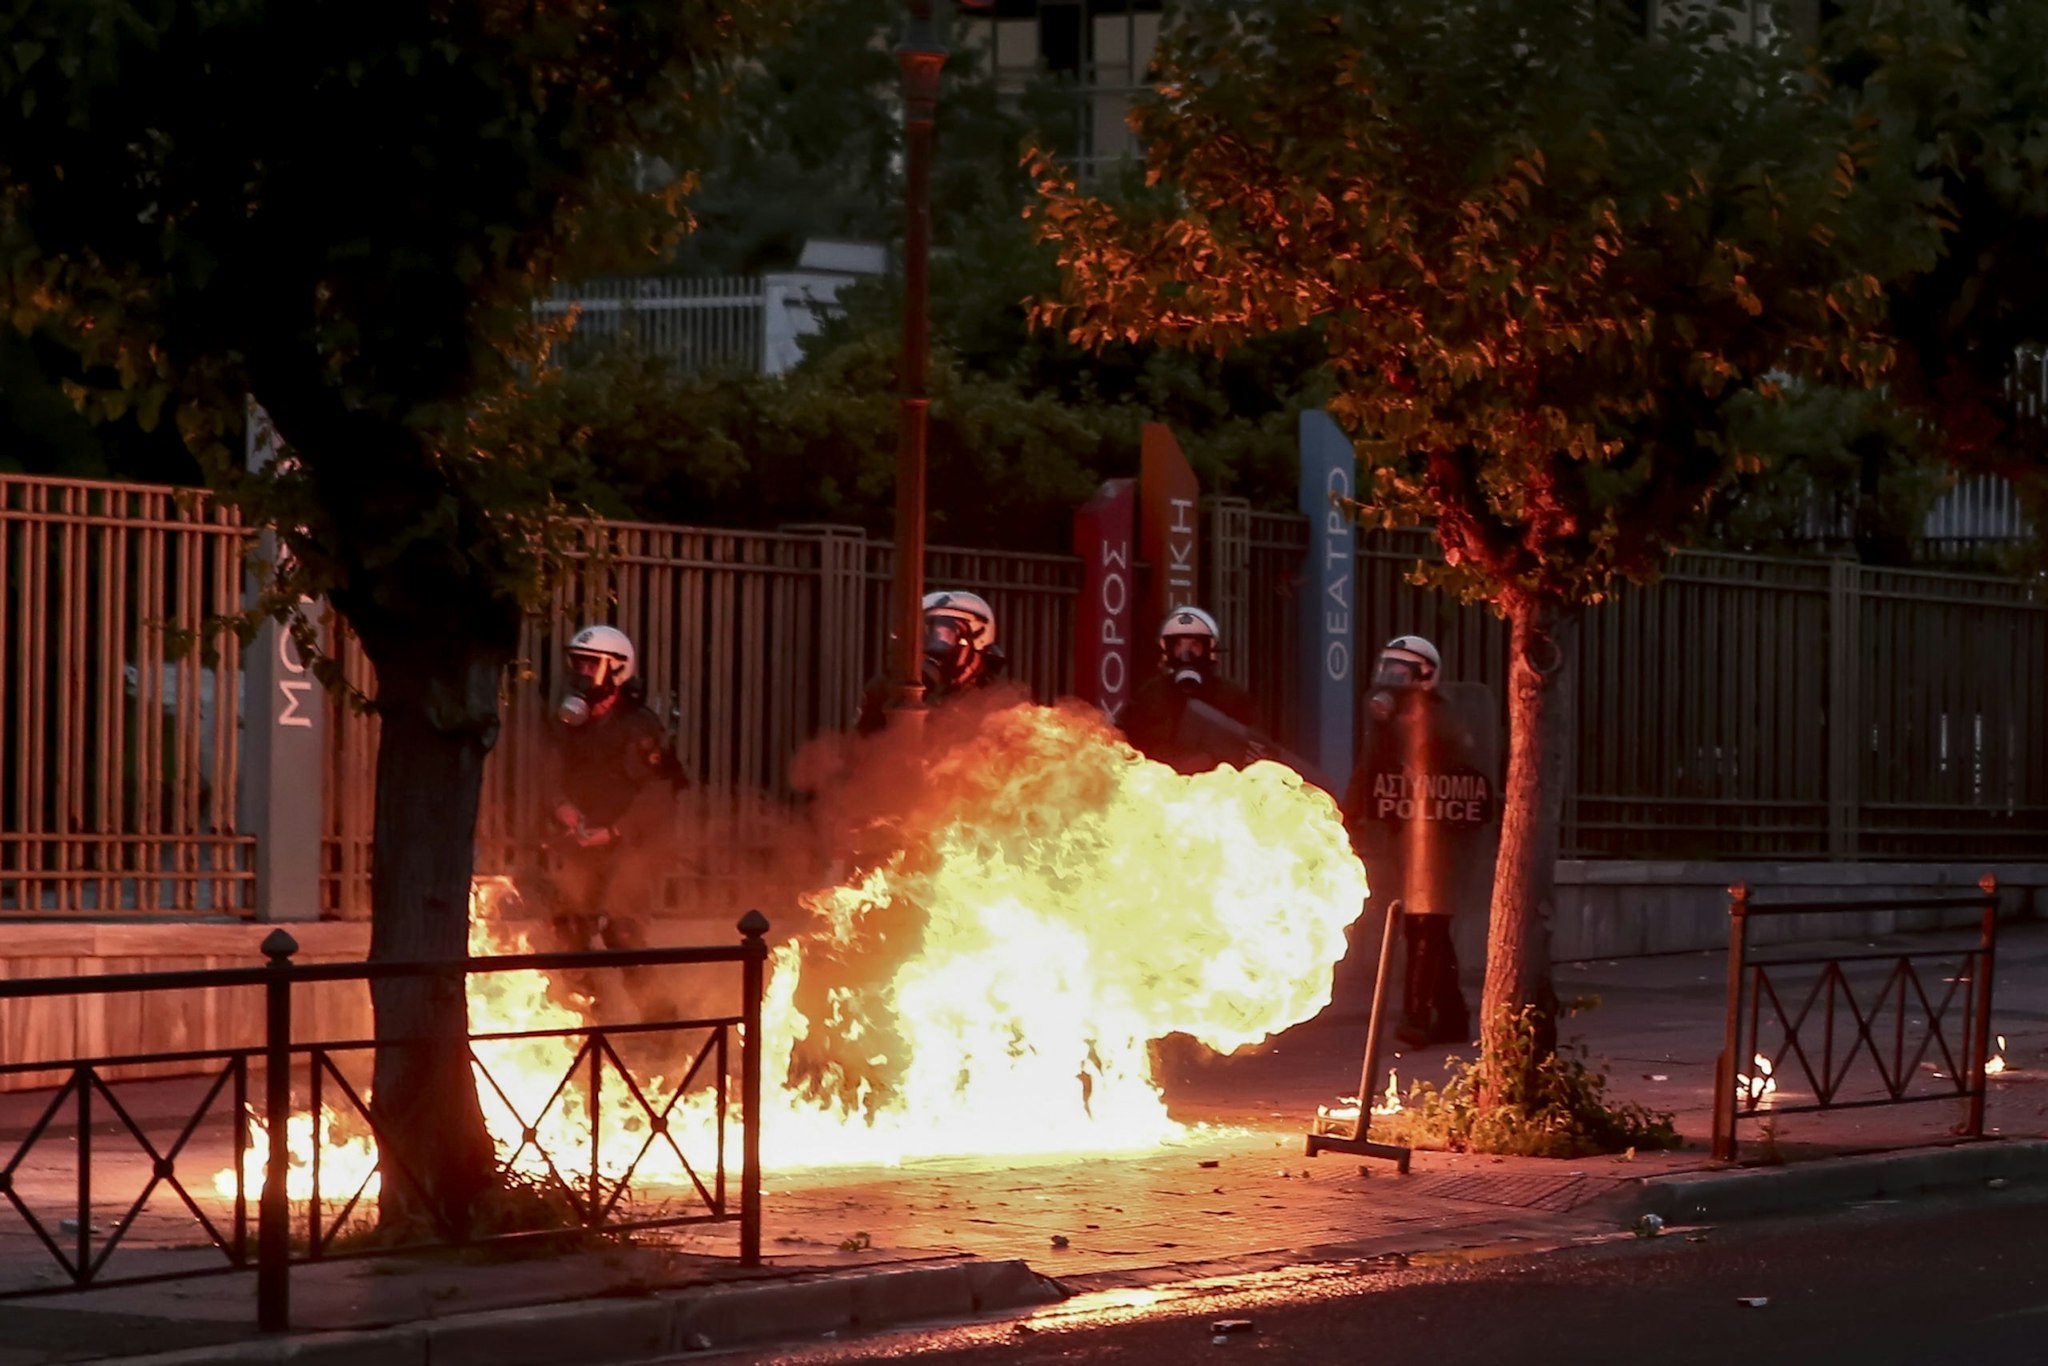 Riot police officers amid flames by petrol bombs thrown by protesters close to the U.S. embassy, during a demonstration over the death of George Floyd , in Athens, Greece on June 3, 2020. (Photo by Panayotis Tzamaros/NurPhoto via Getty Images)